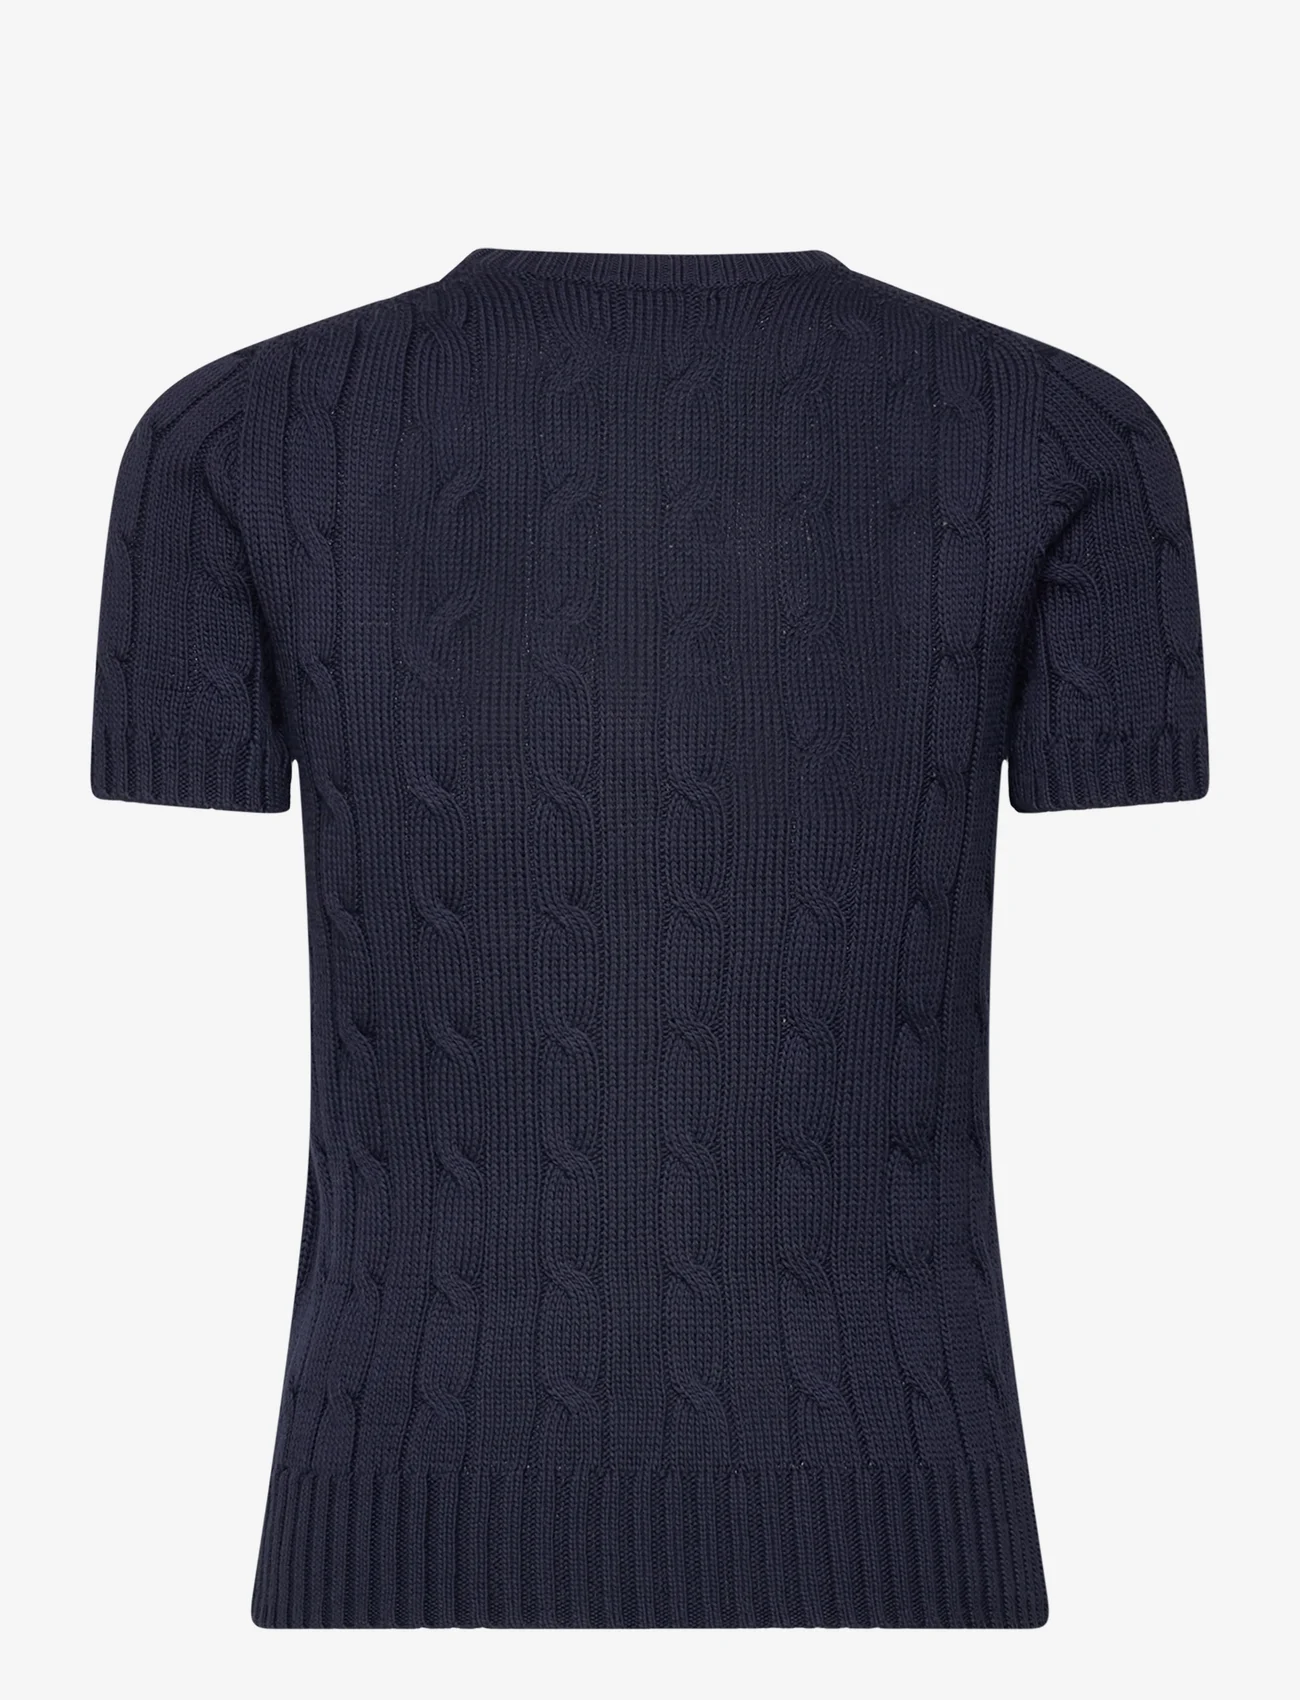 Polo Ralph Lauren - Cable-Knit Cotton Short-Sleeve Sweater - jumpers - hunter navy - 1